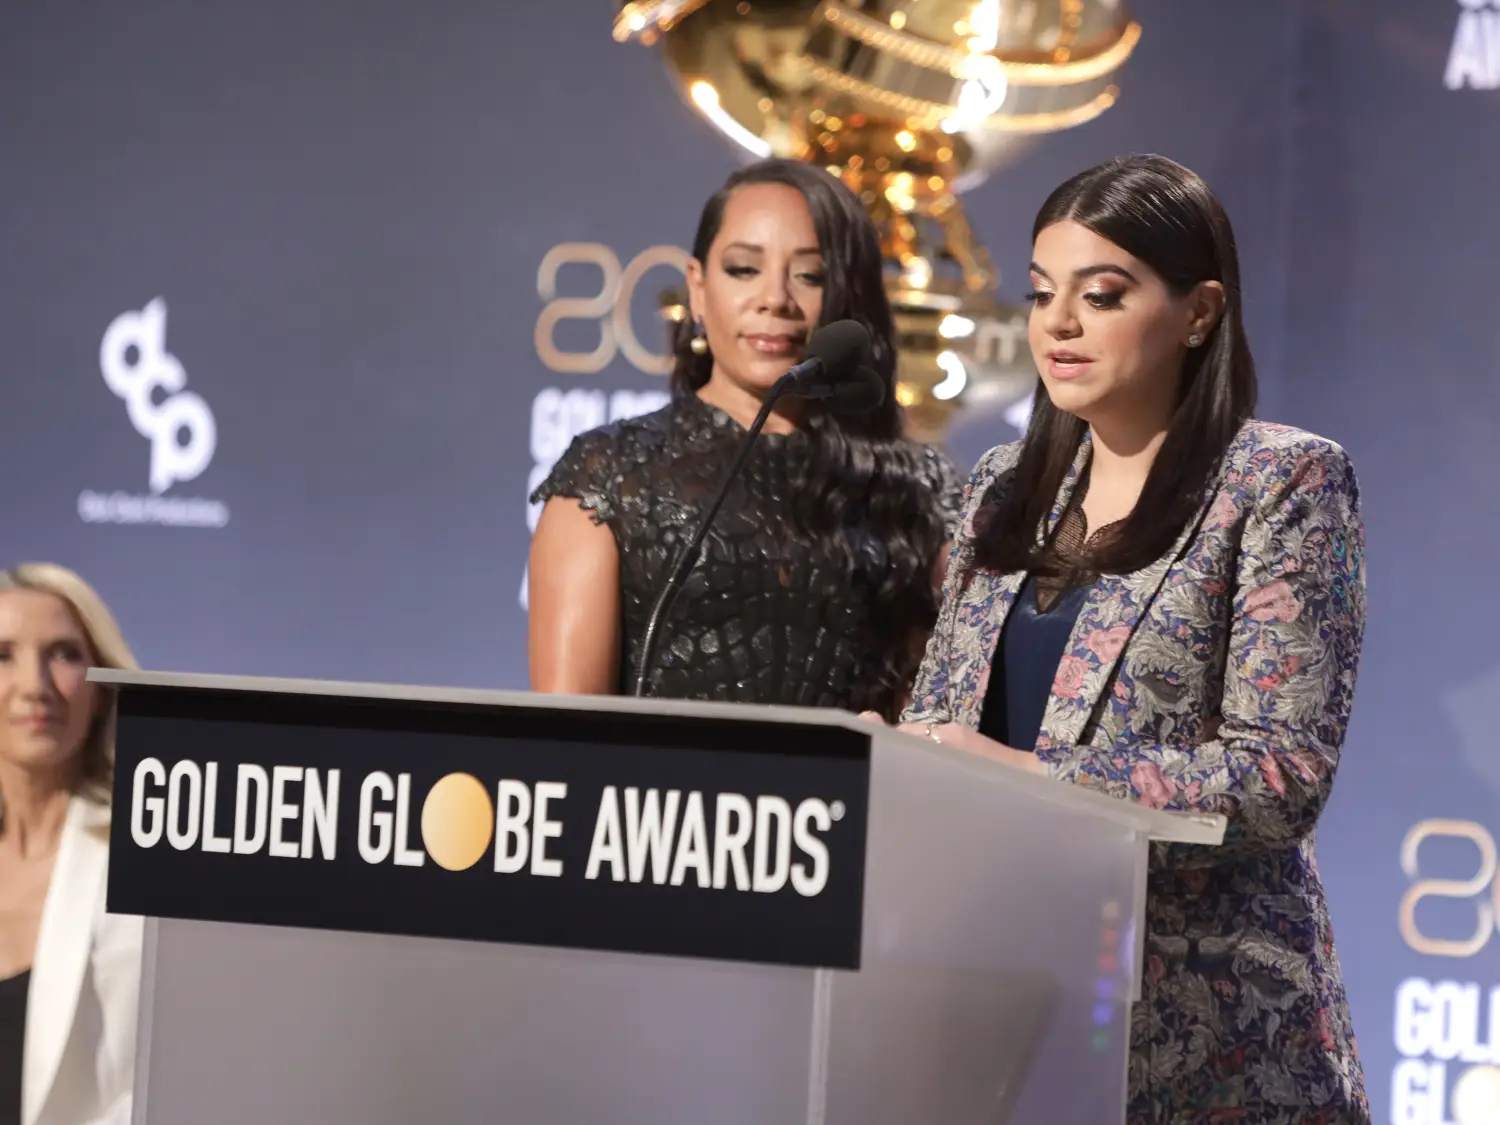 Selenis Leyva and Mayan Lopez at 80th Golden Globe Awards Nomination Announcement - Photo Credit Harmony Gerber/HFPA